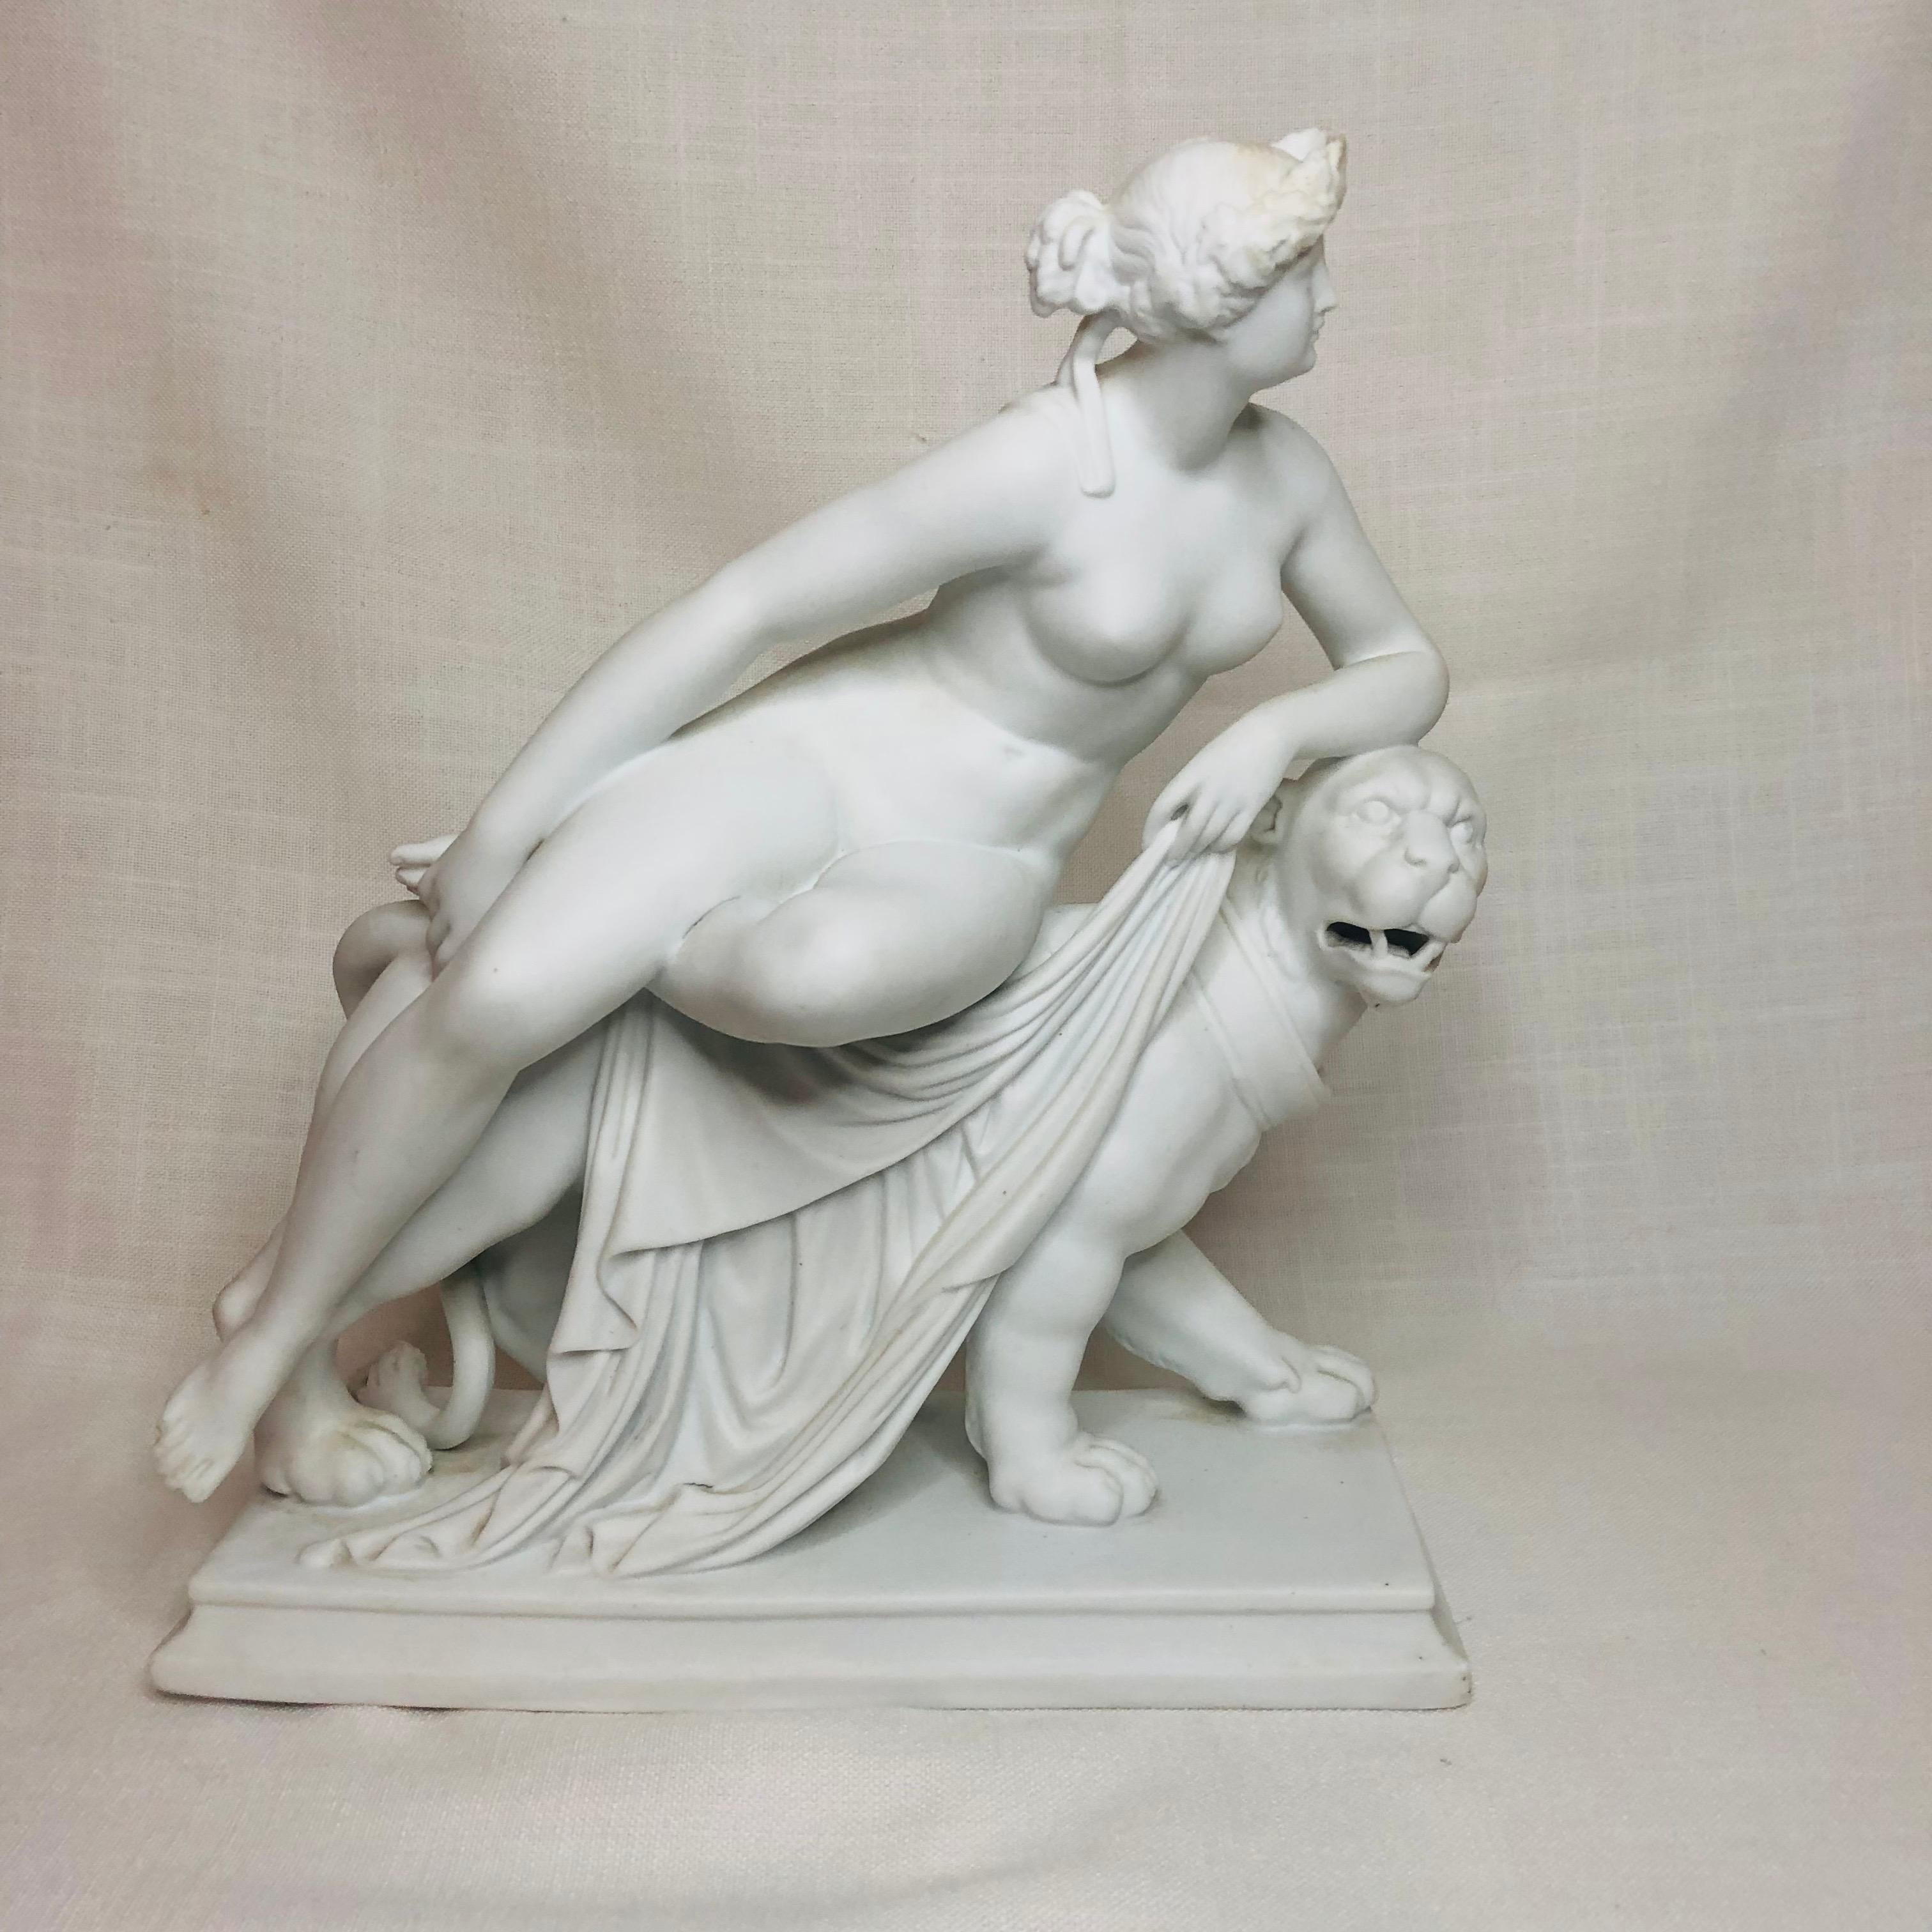 I want to offer you this spectacular nineteenth century English parian figure of Adriadne who is riding on top of a panther. As you can see from the pictures, this white parian figurine of this lady and panther is beautifully modeled by the artist.